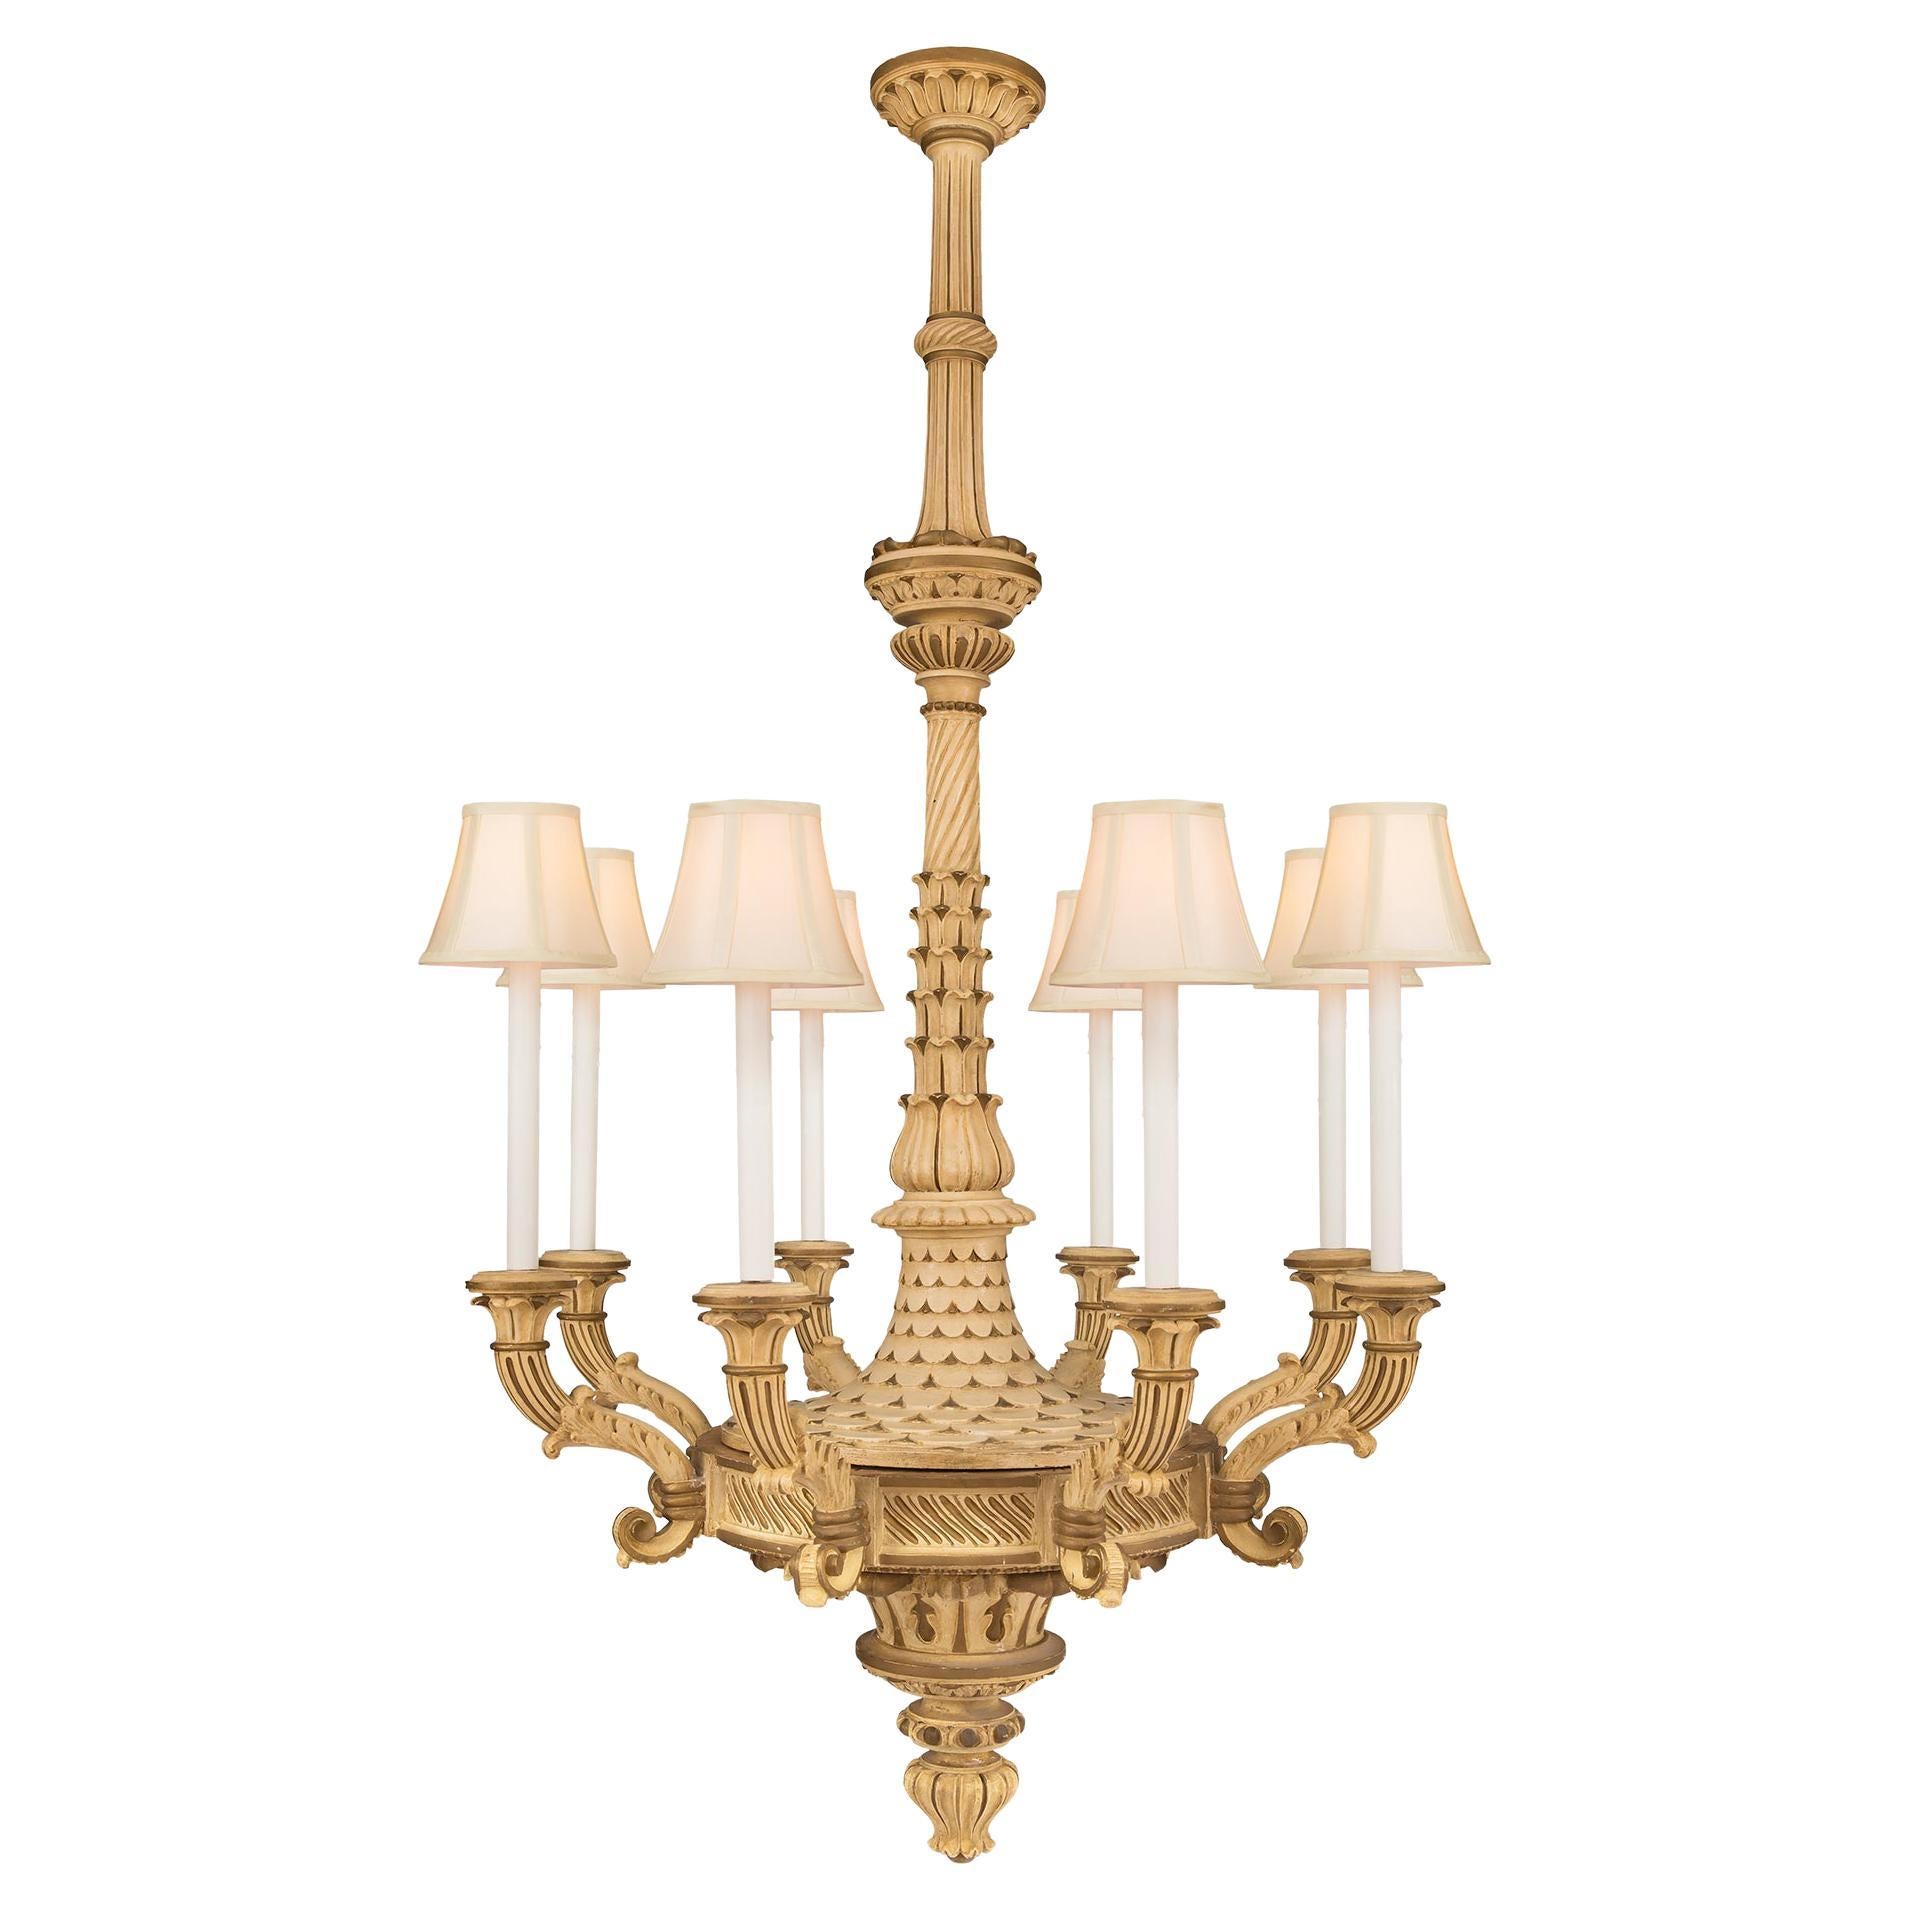 Italian 19th Century Neoclassical Patinated Eight-Arm Chandelier For Sale